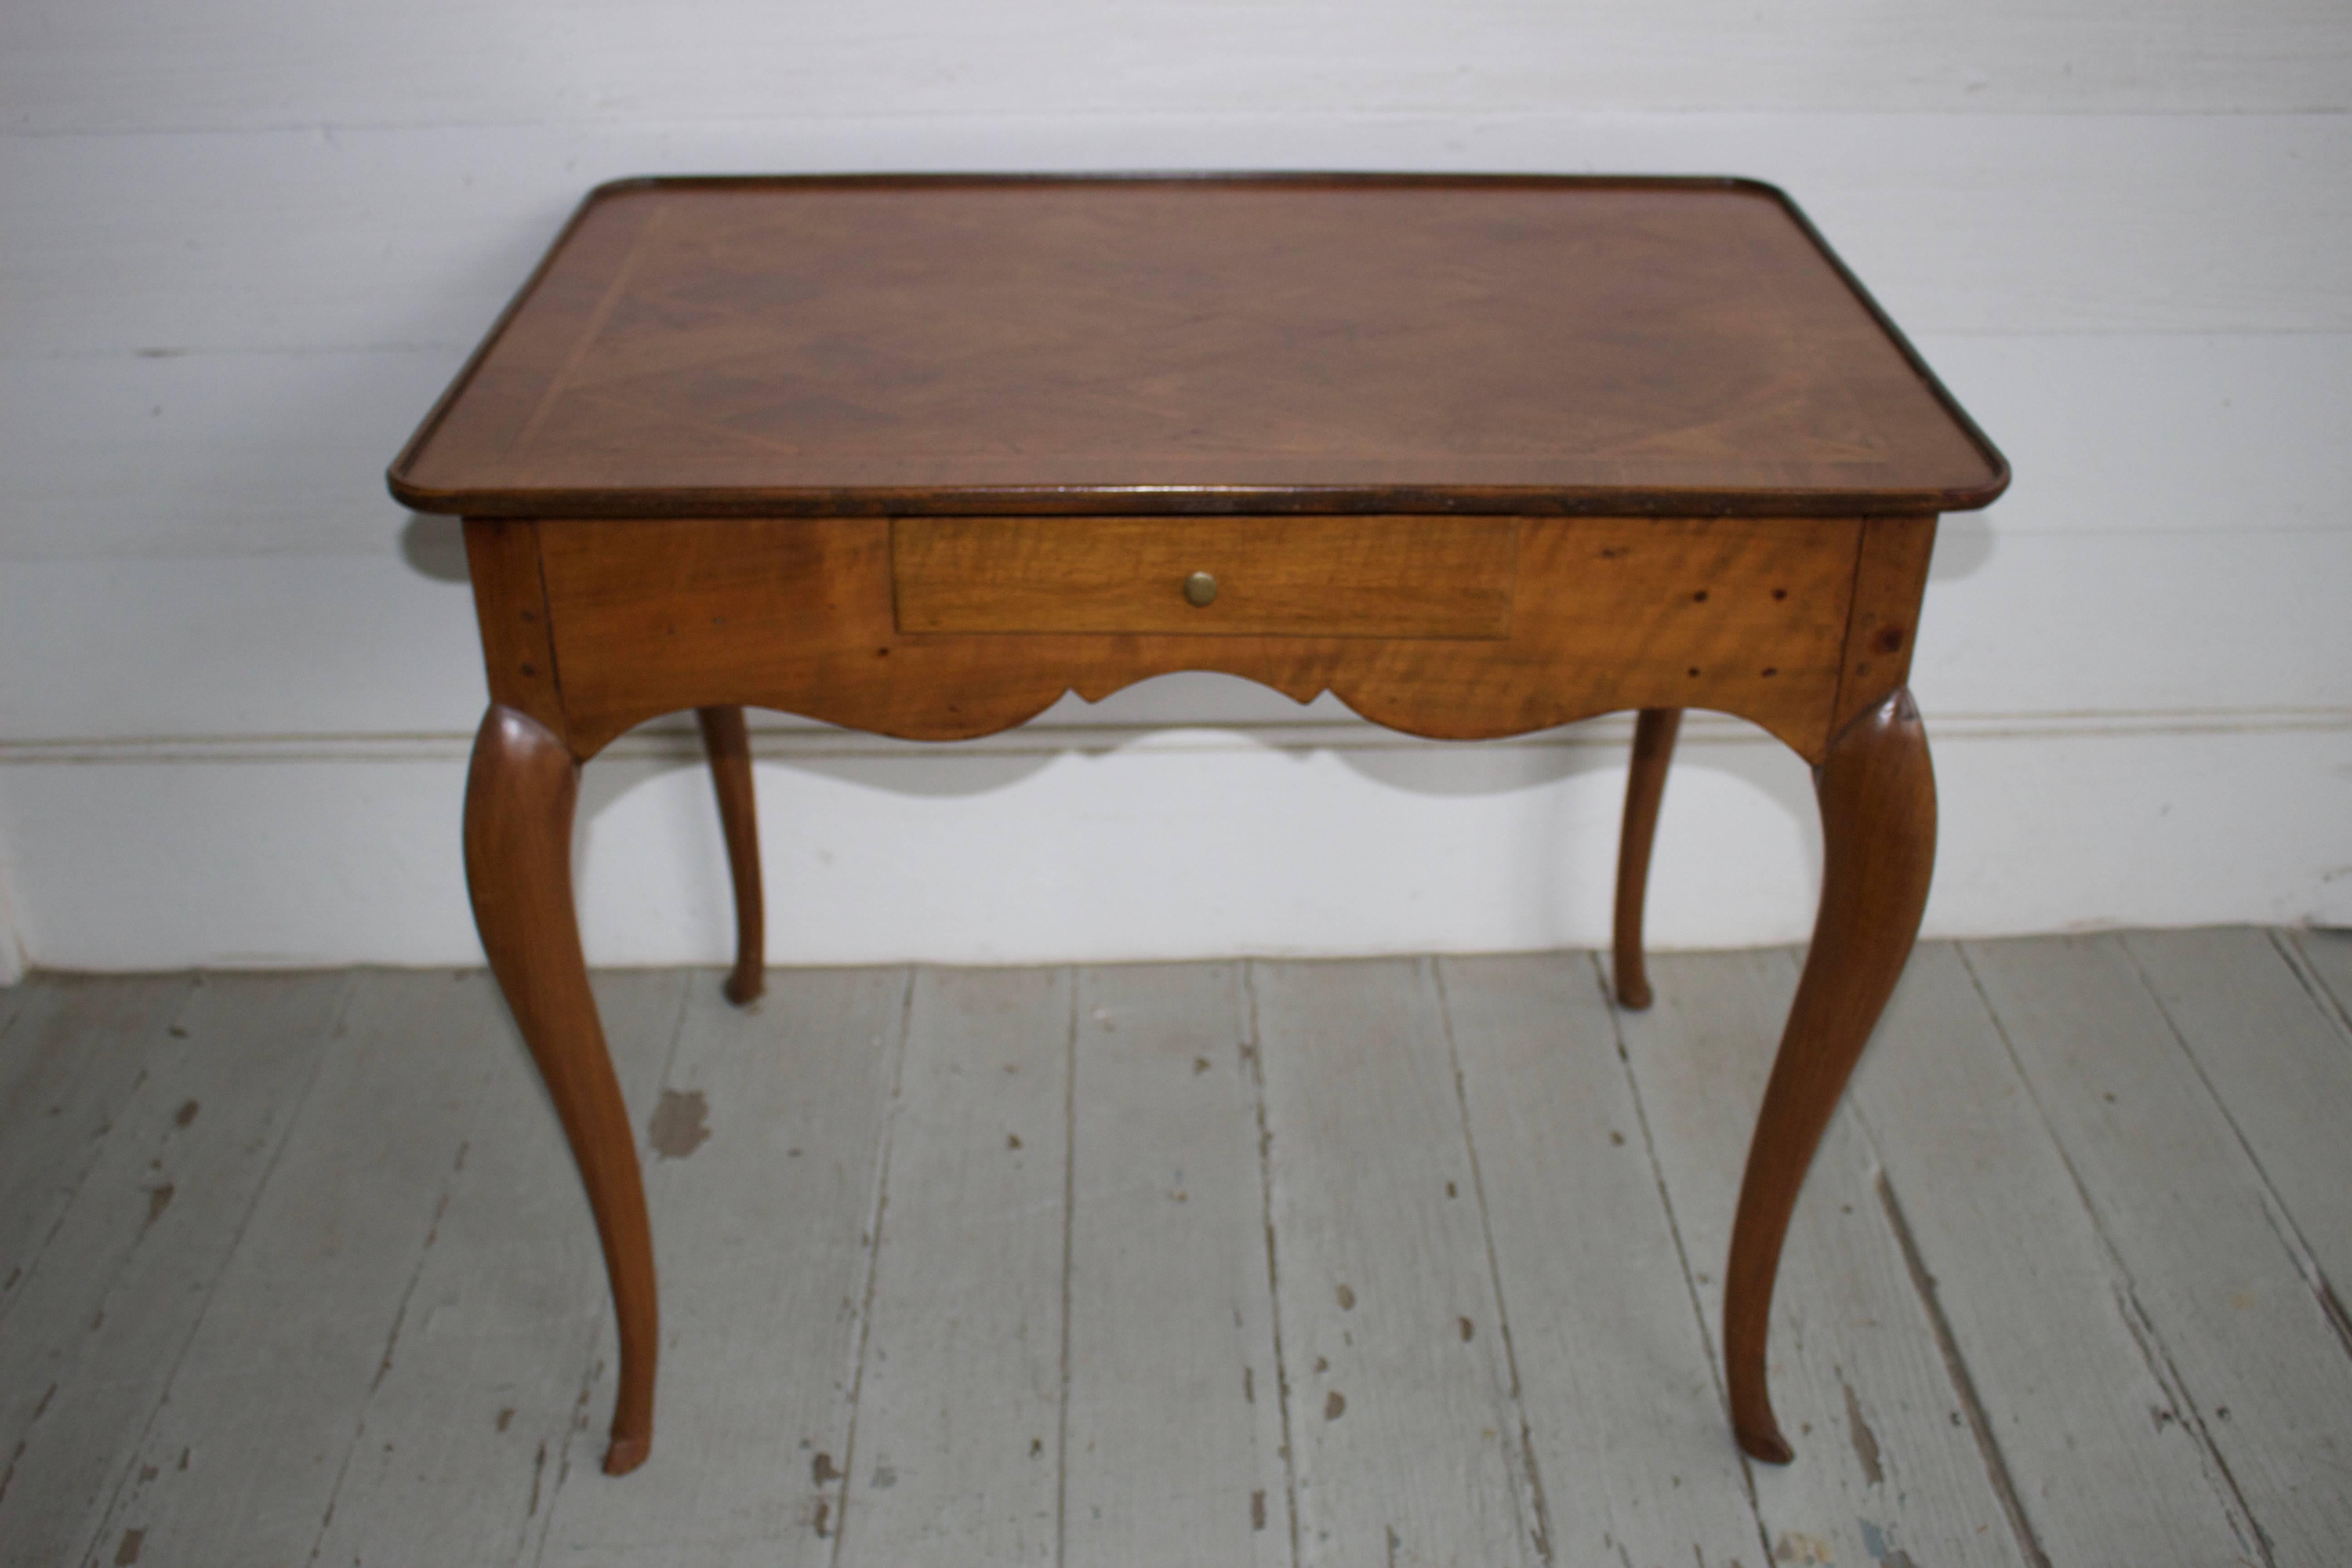 A beautiful Swiss walnut writing table with a burled parquetry top from the Neauchatel region of Switzerland. These tables are ideal to use next to a sofa, bedside or has a tea or cocktail table in front of a sofa.